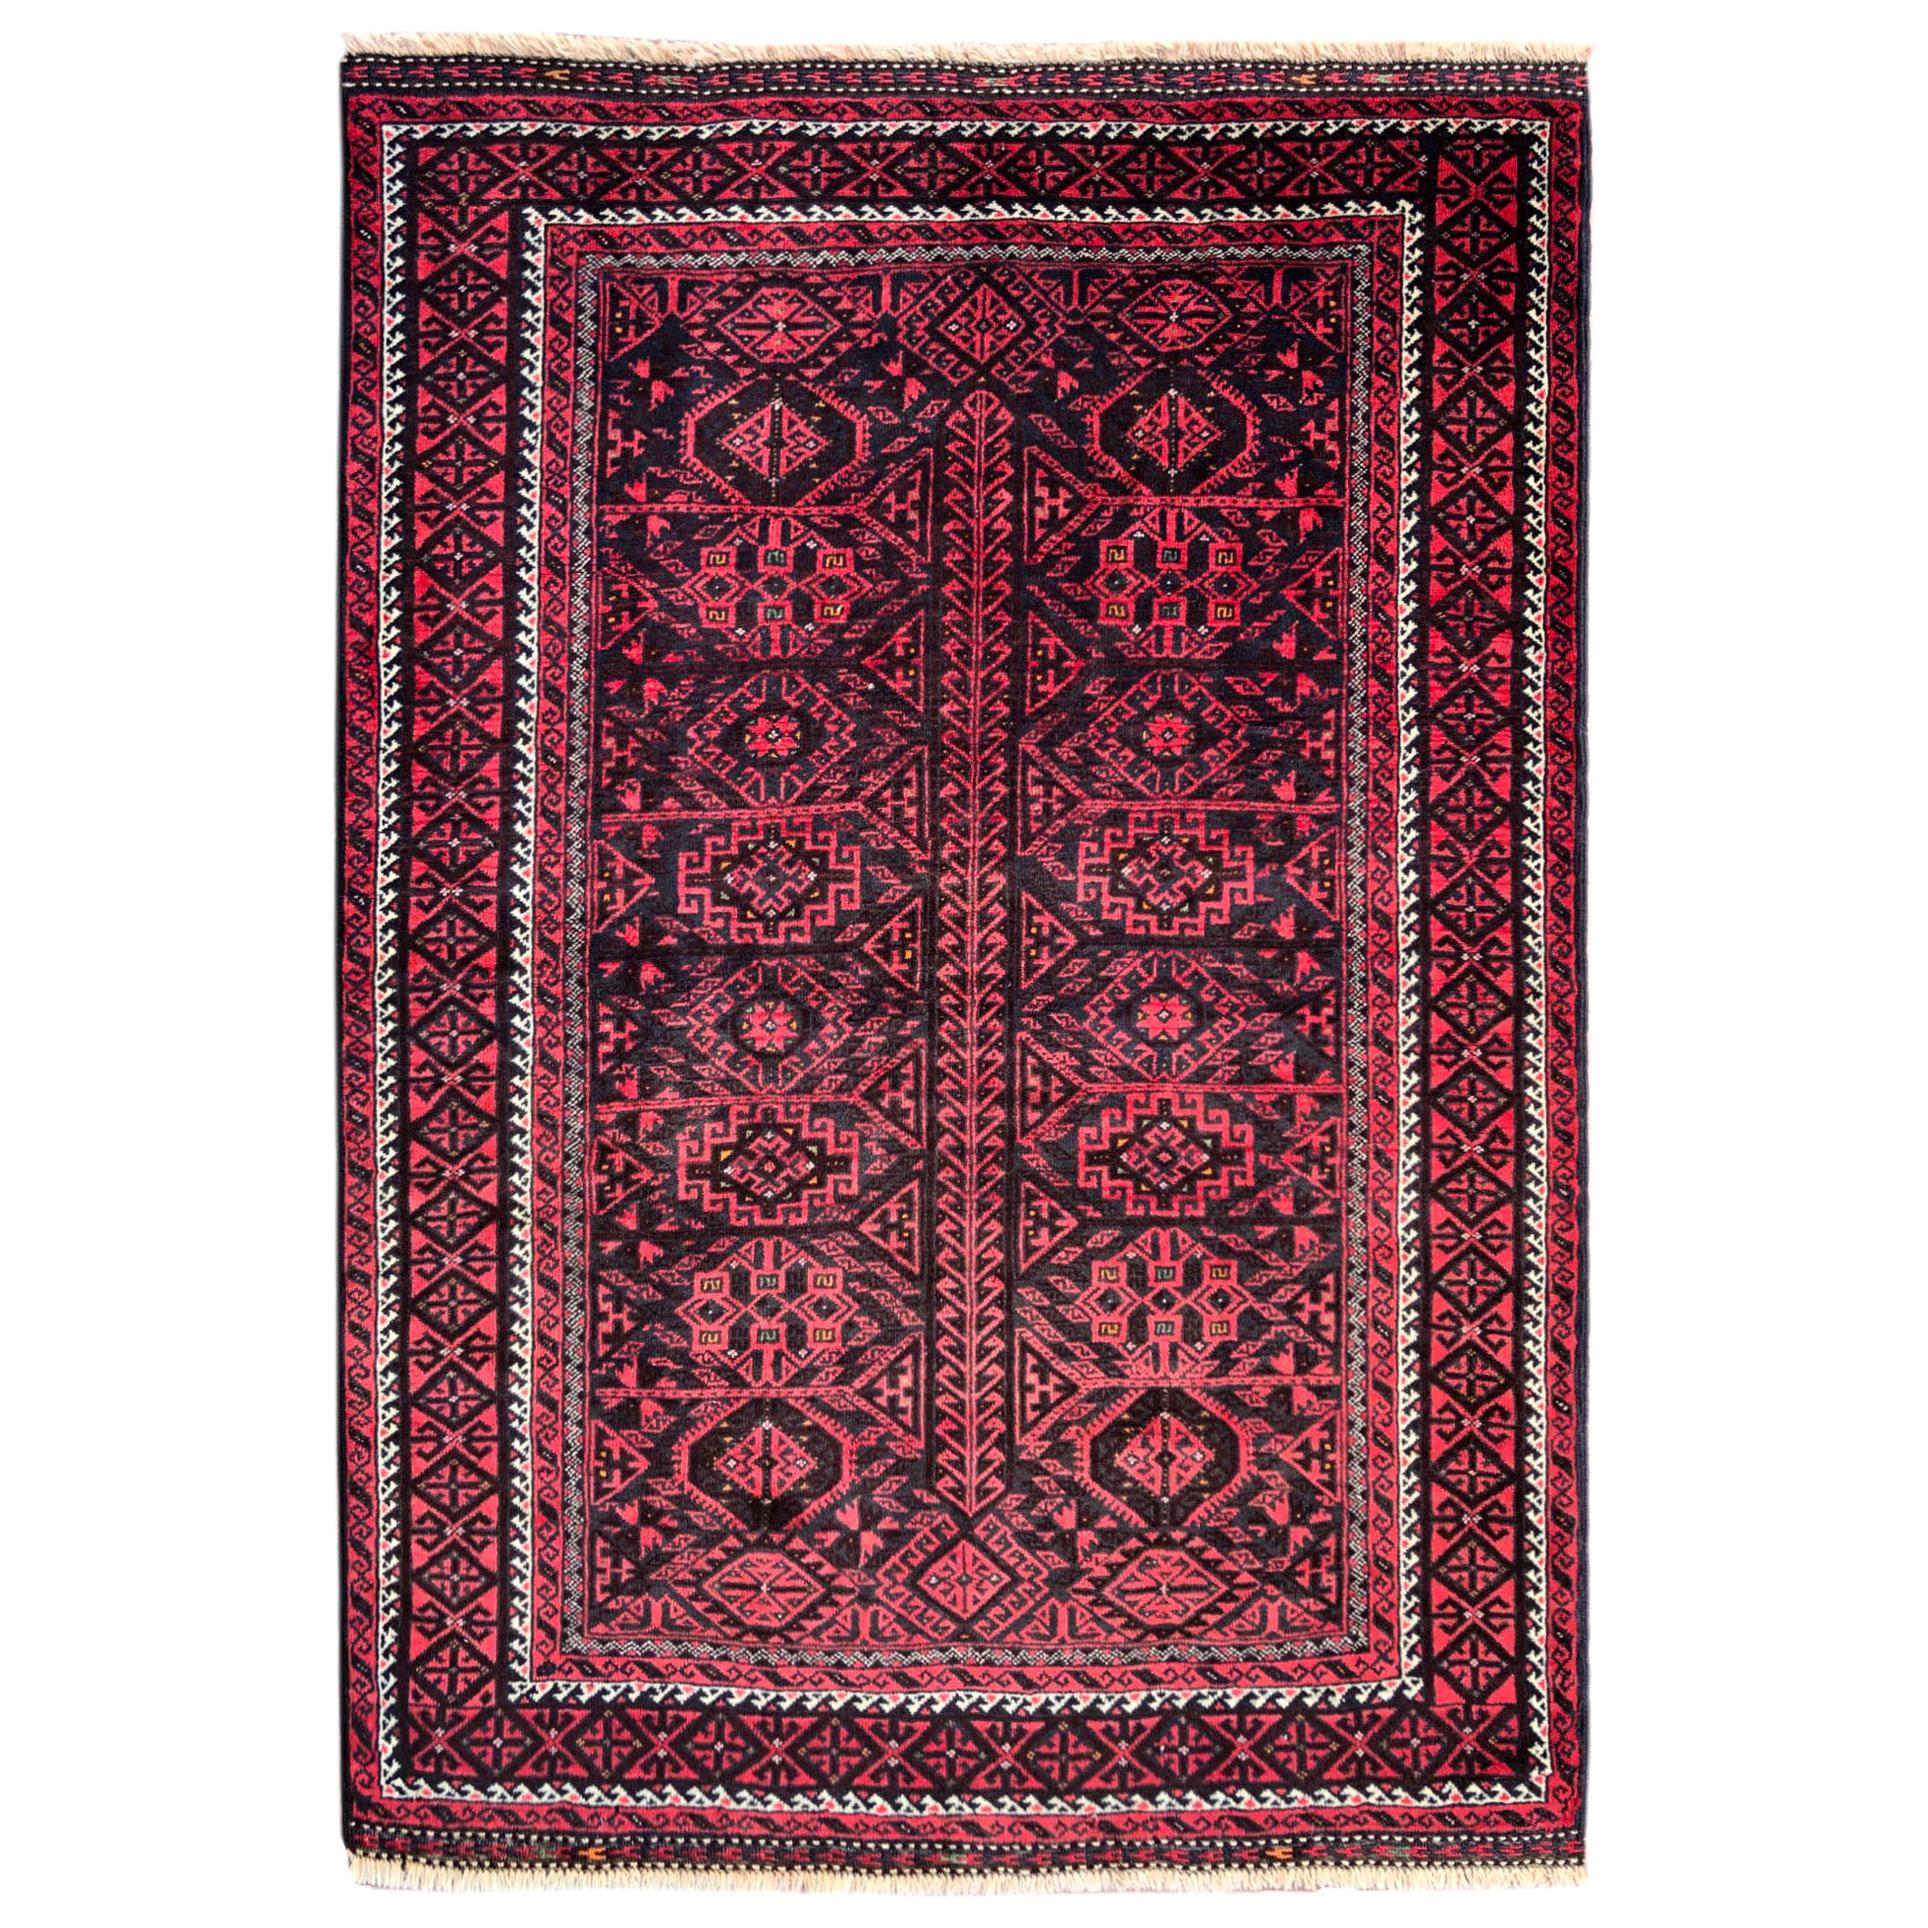 Authentic Persian Hand Knotted Geometric All-Over Red Black Baluchi Rug, 1960